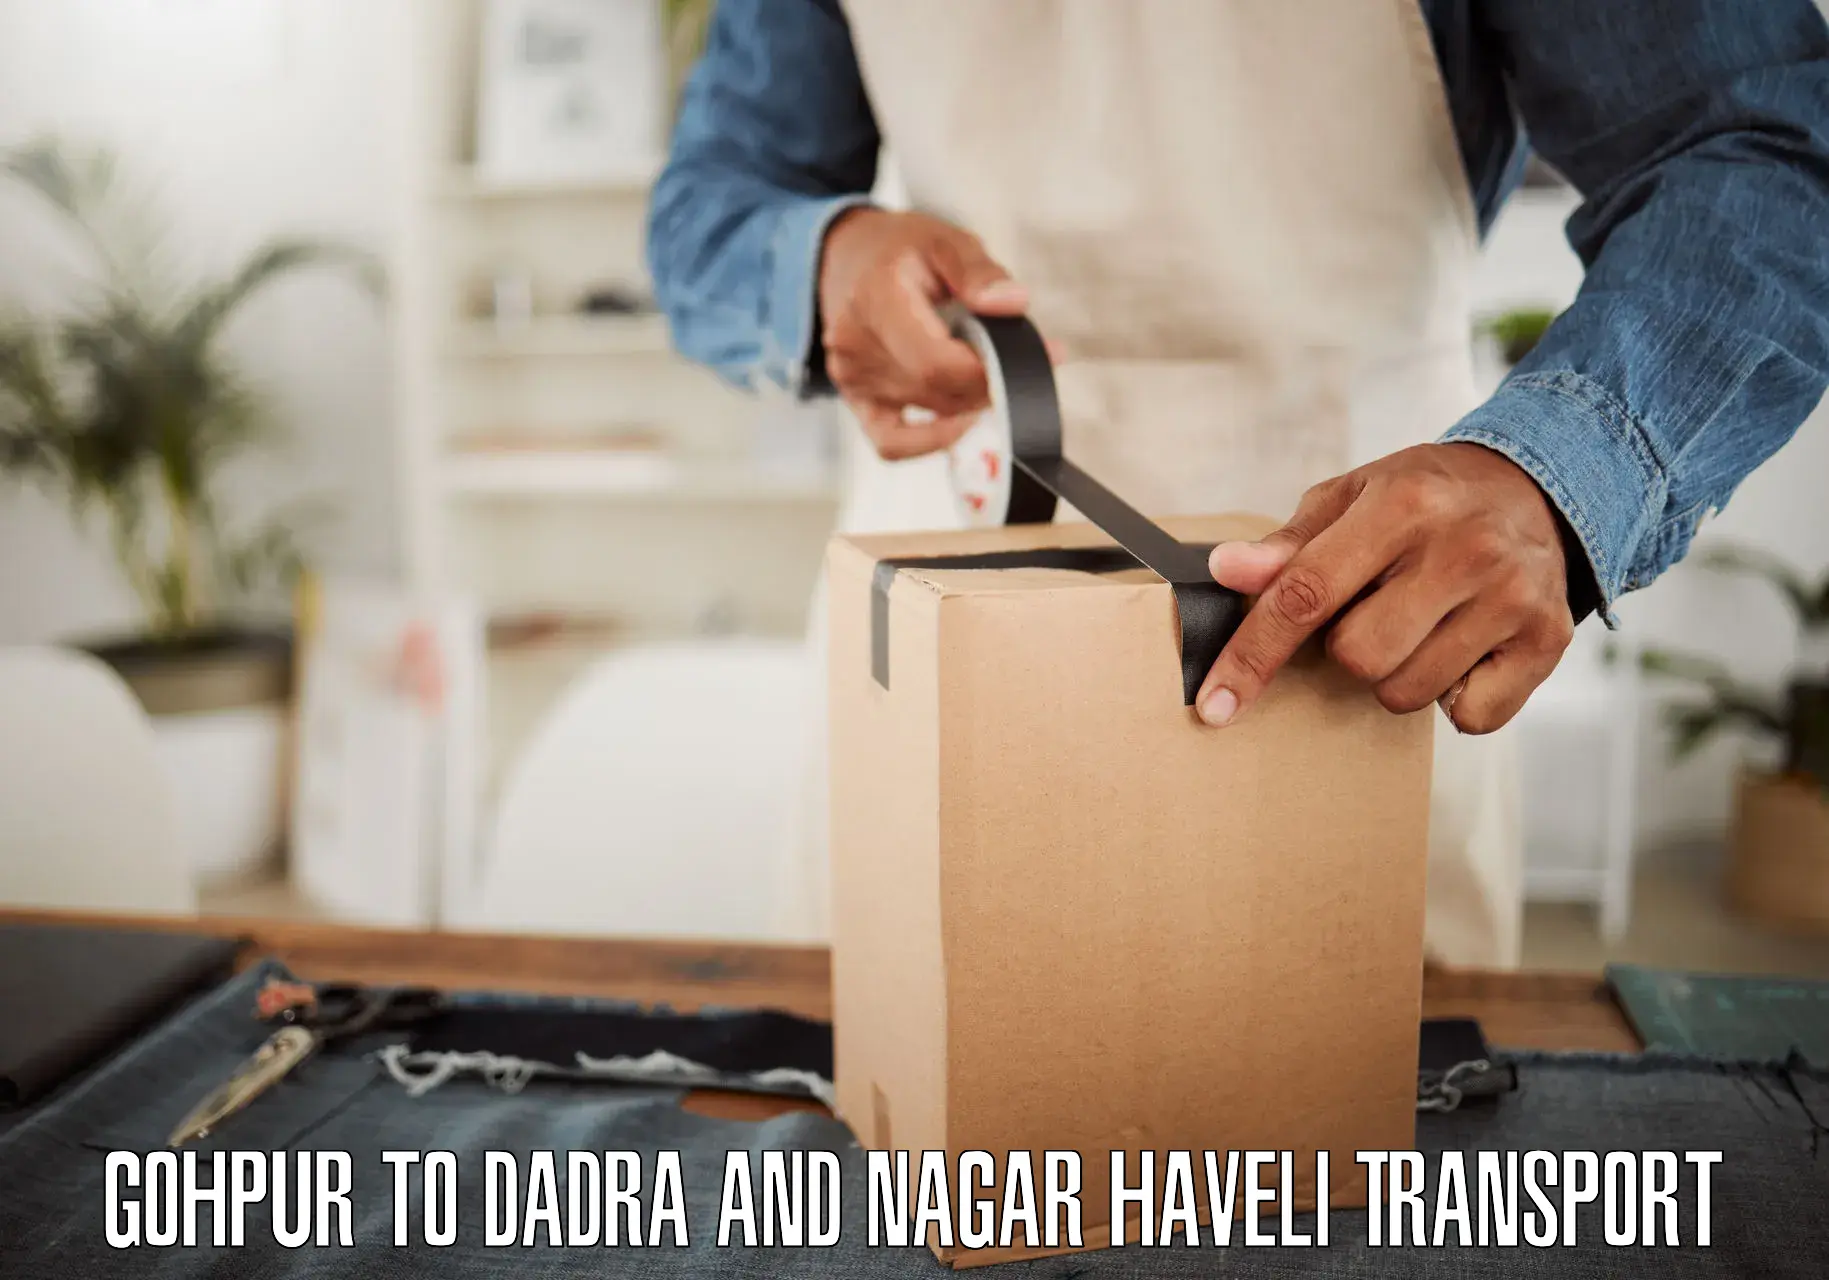 Transport shared services in Gohpur to Dadra and Nagar Haveli